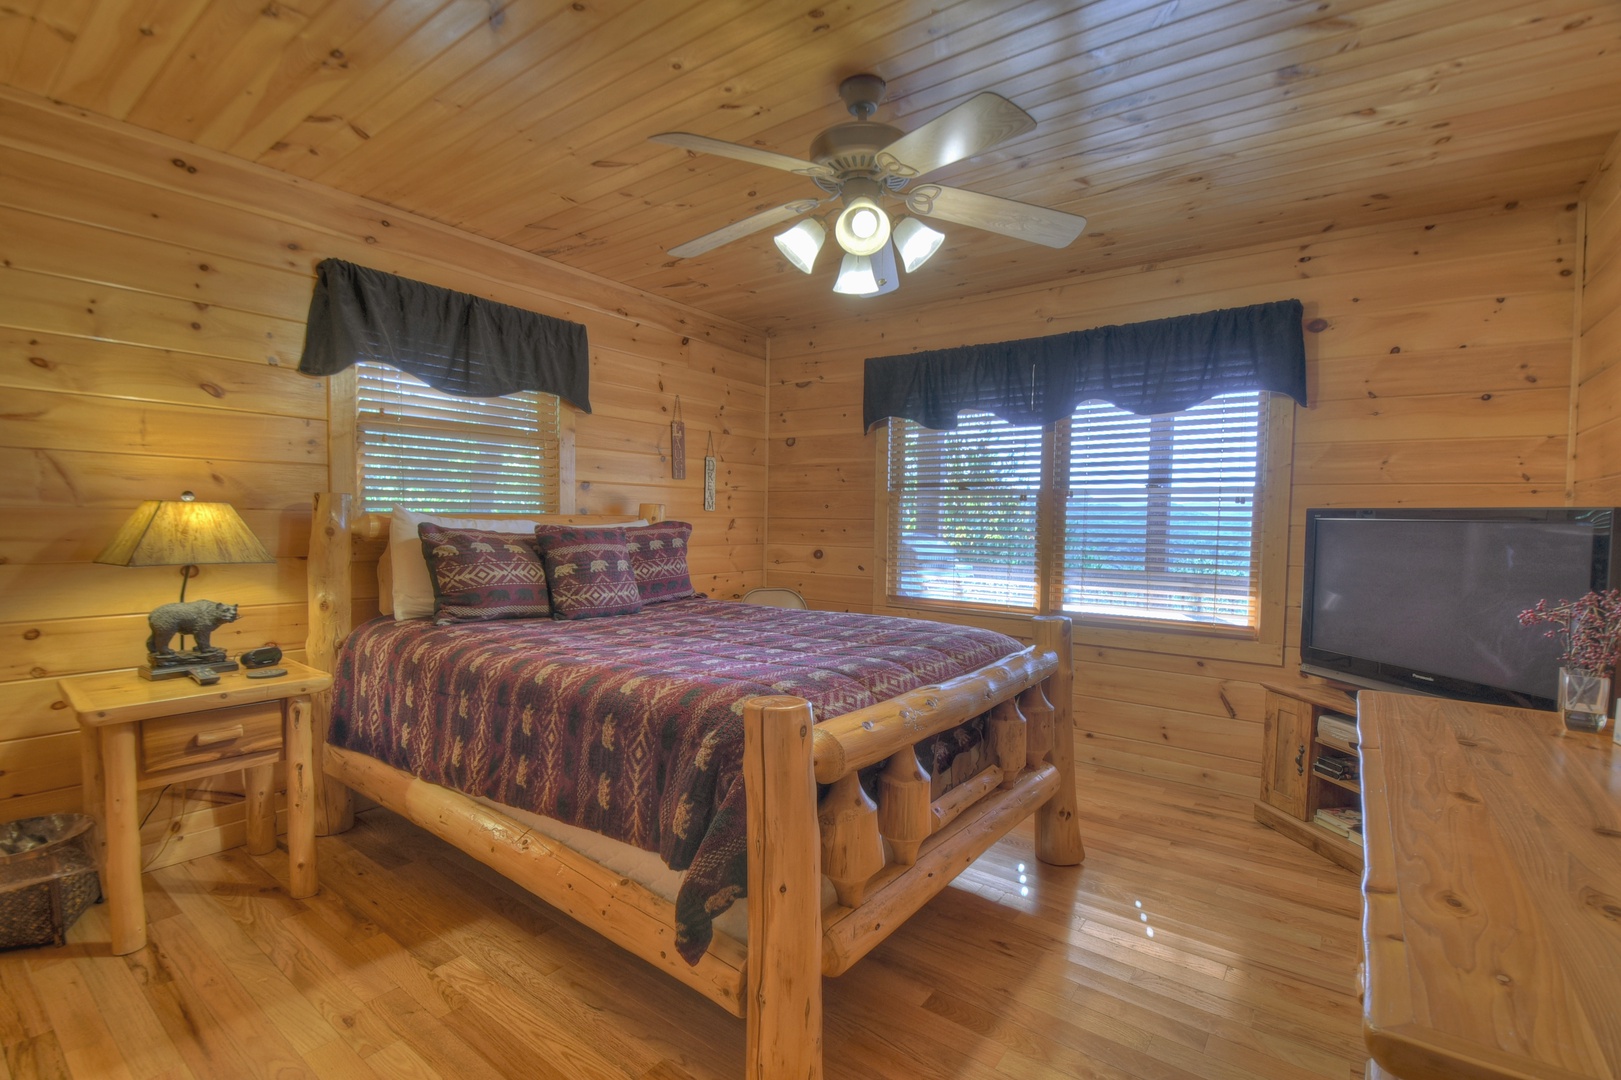 Sunrock Mountain Hideaway- Queen room on the middle level with a TV